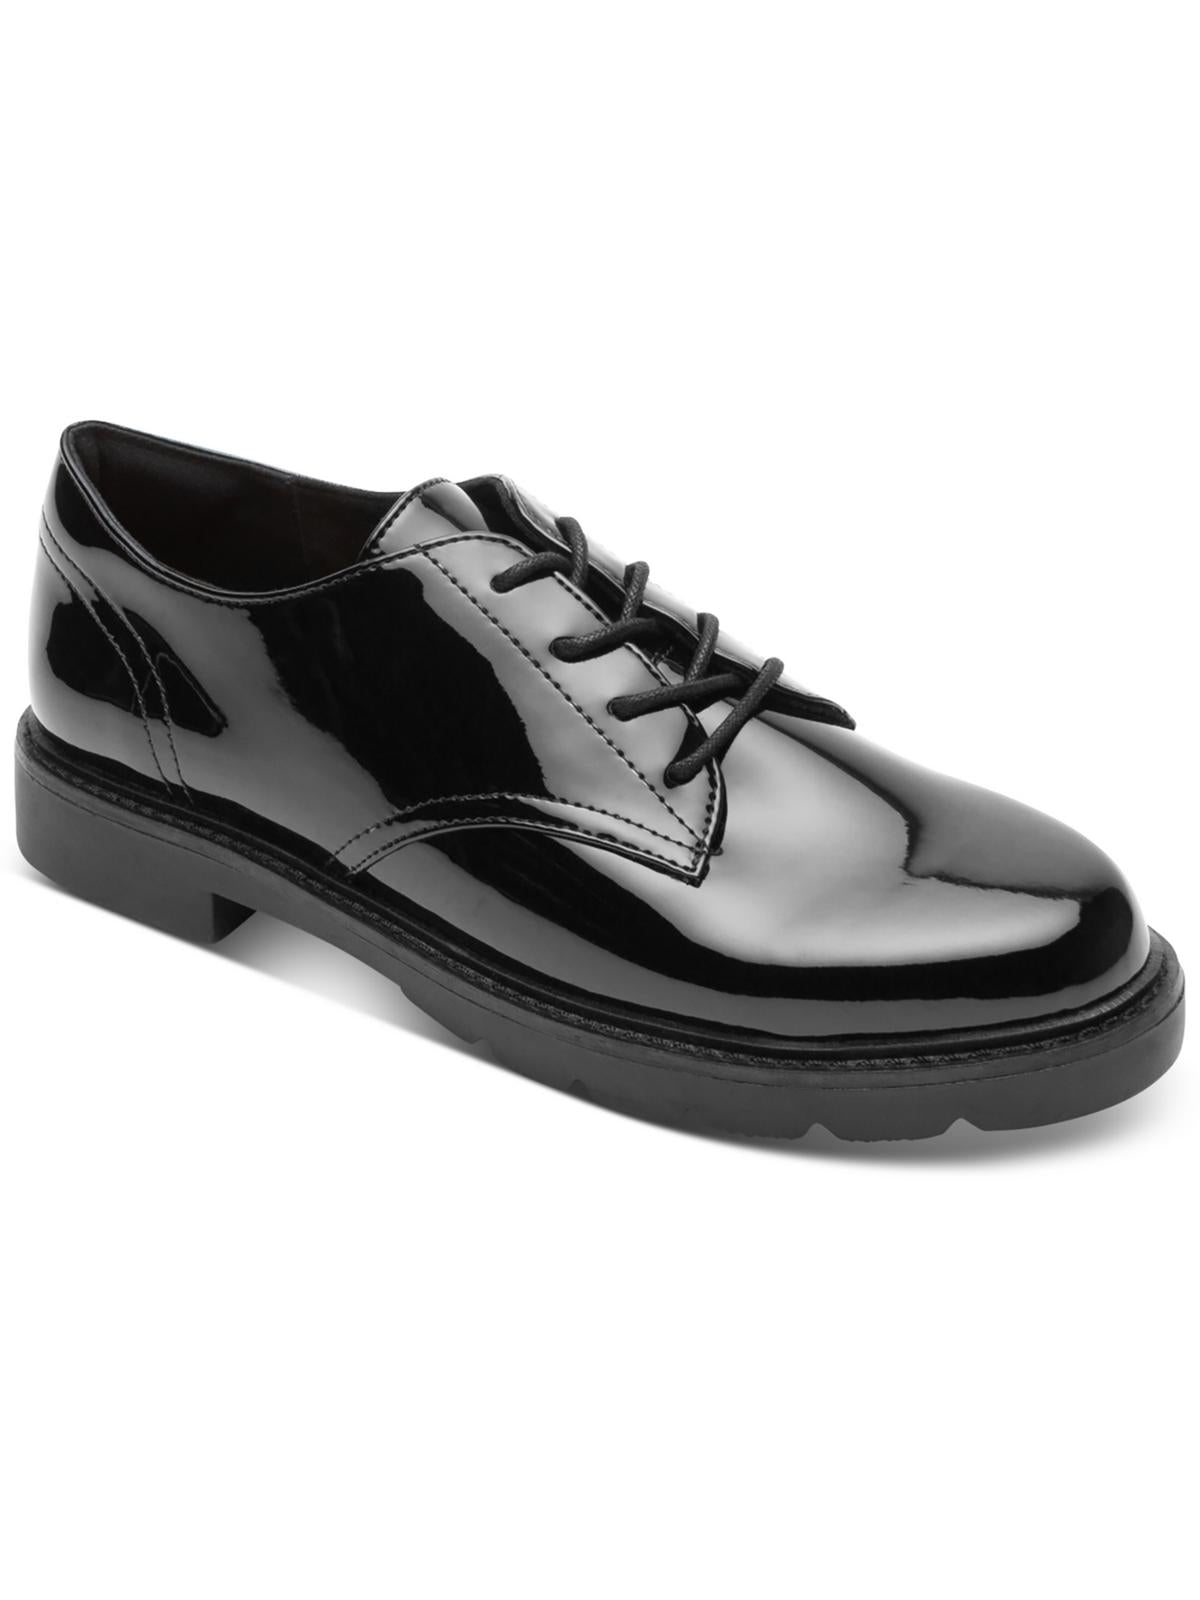 Shop Rockport Womens Patent Dressy Oxfords In Black